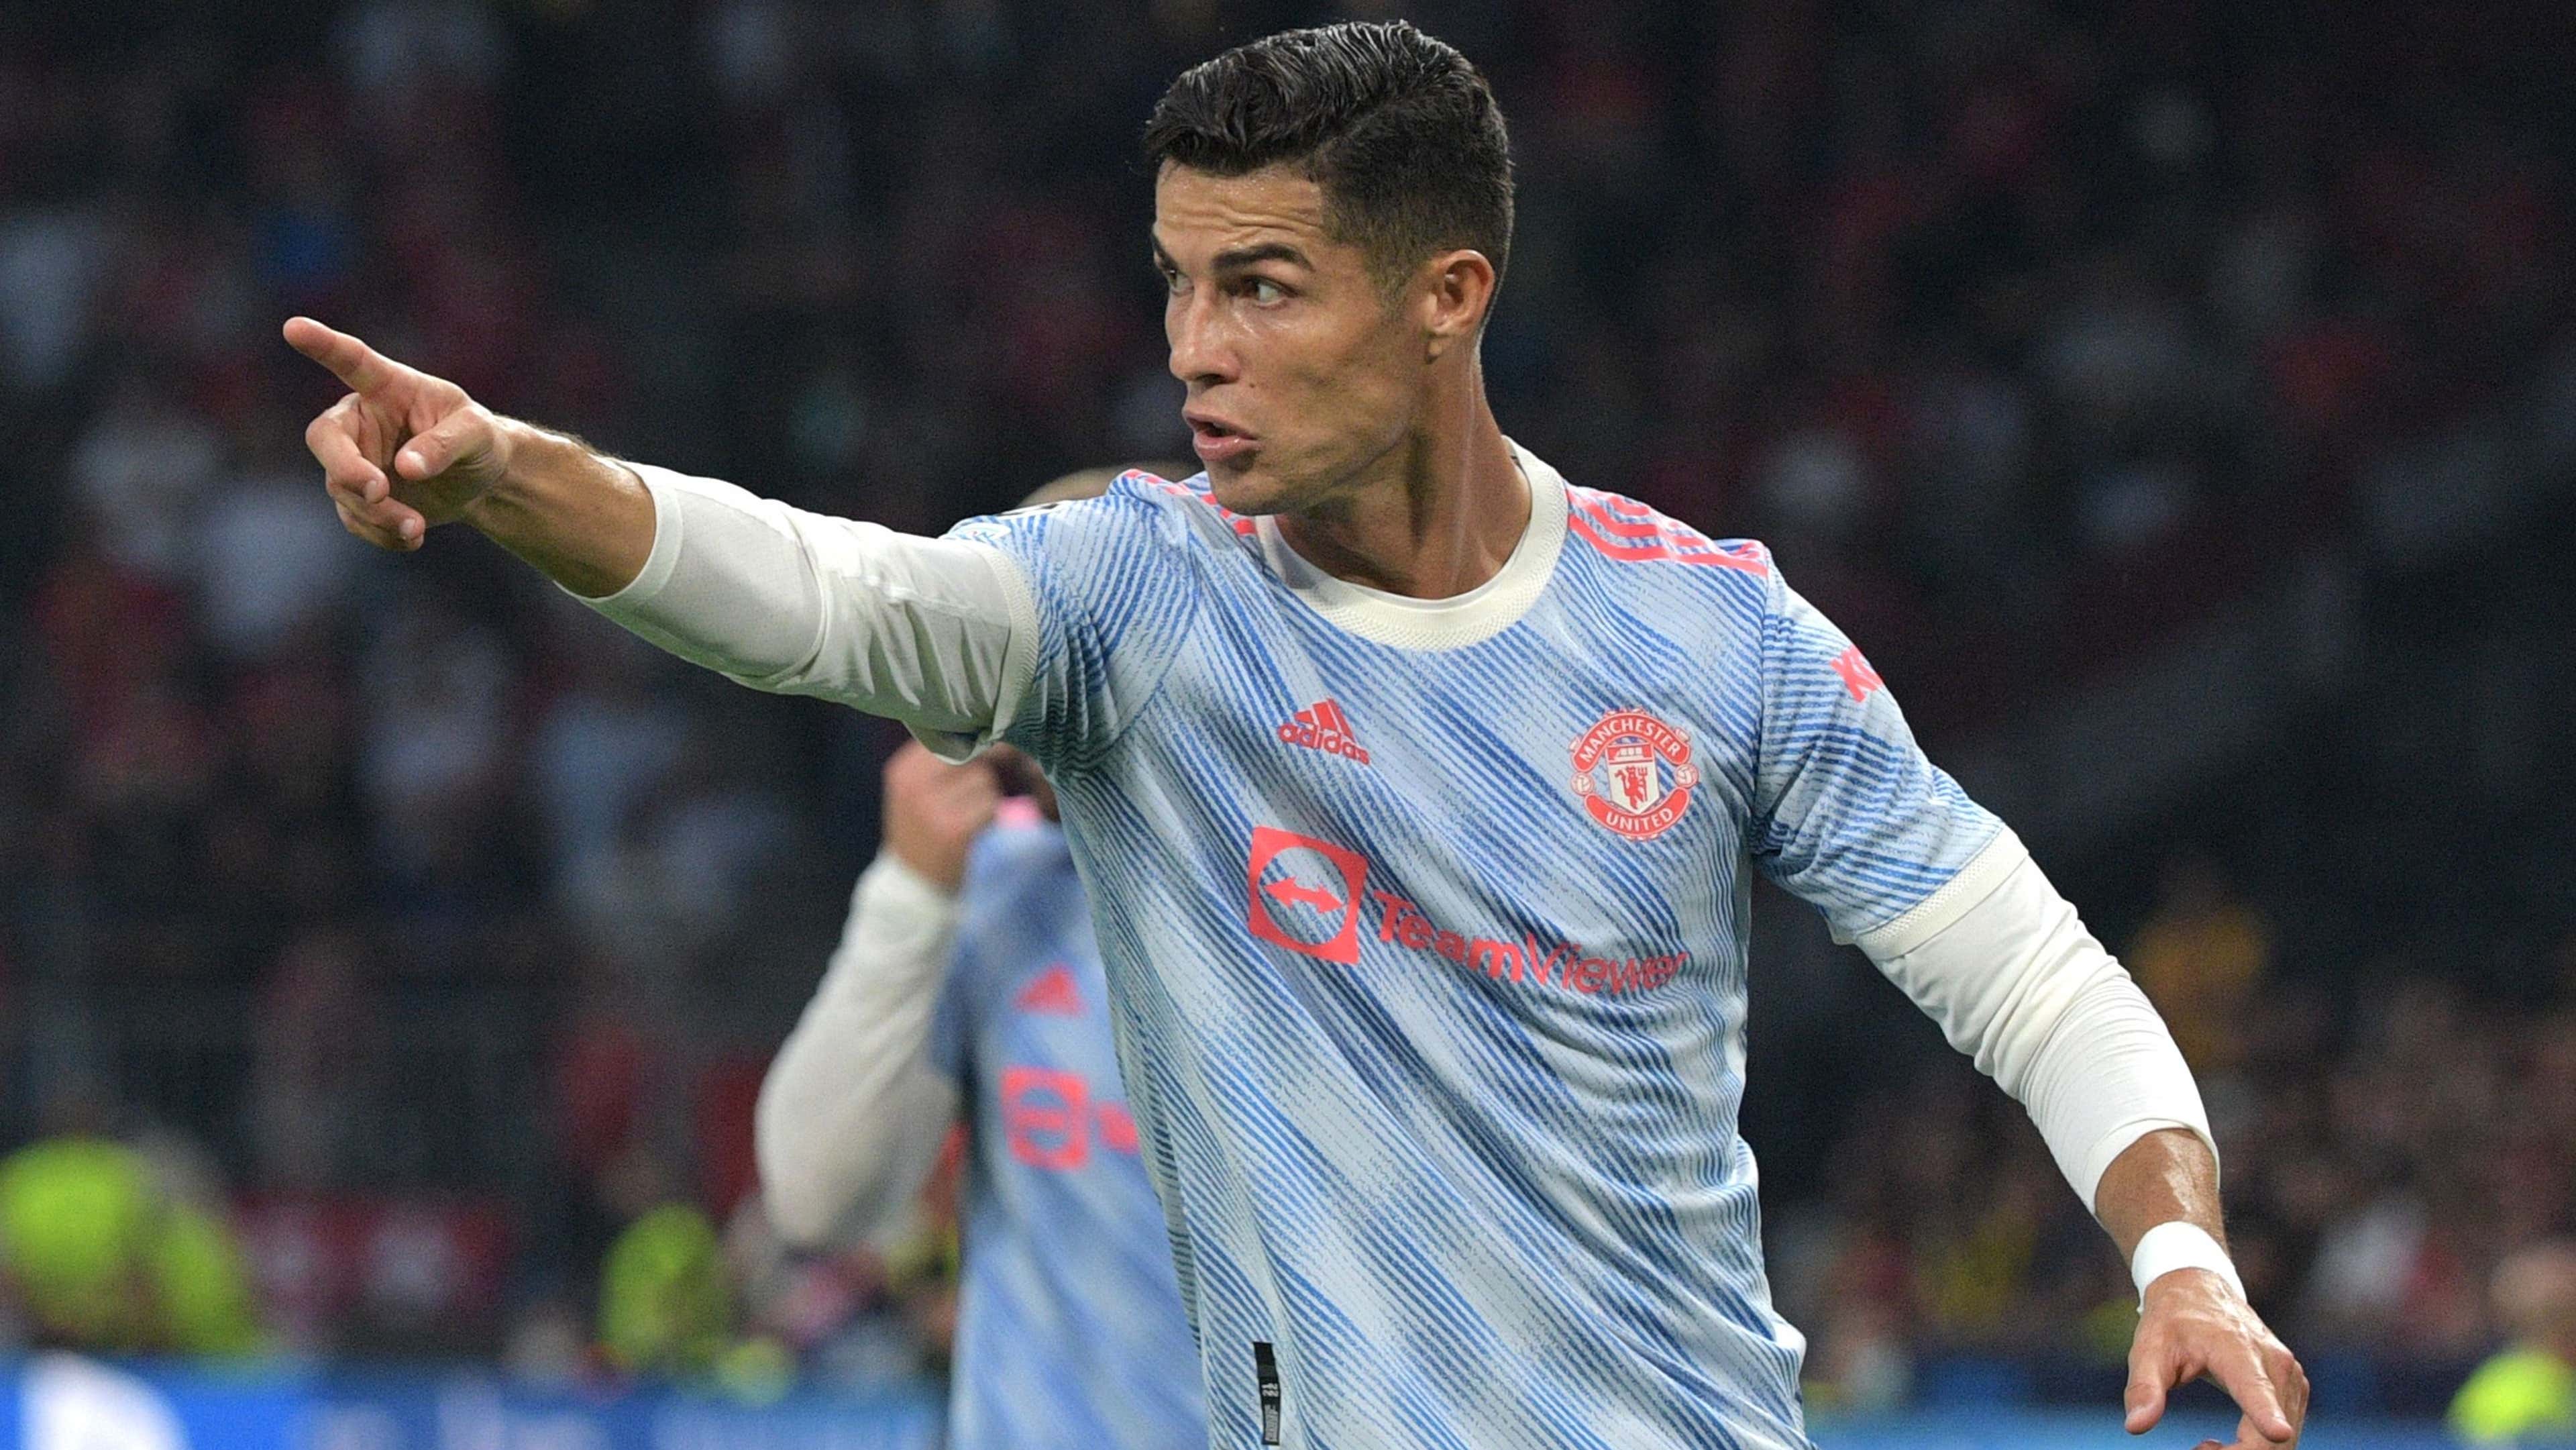 The Ronaldo show: Are Man Utd being sidetracked by media circus?